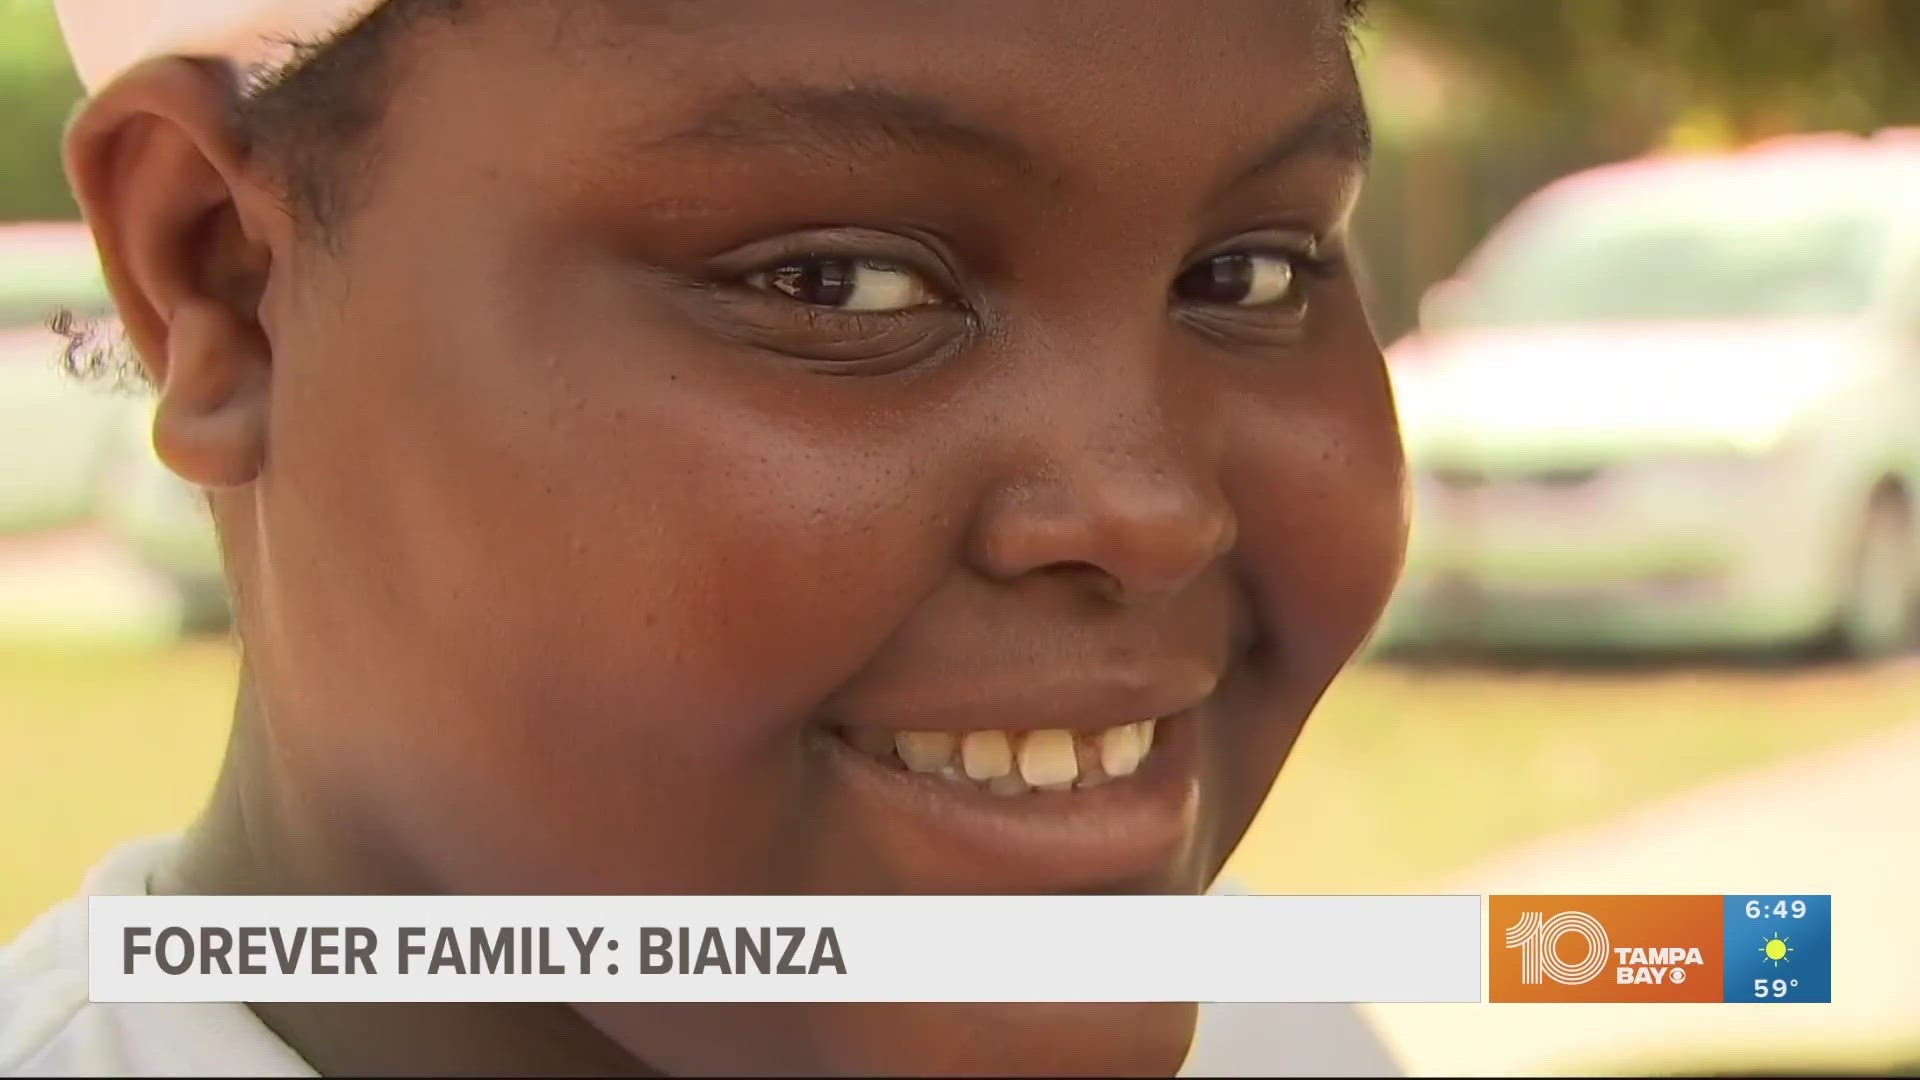 Bianza may only be in 7th grade but she has dreams of being a pediatrician.